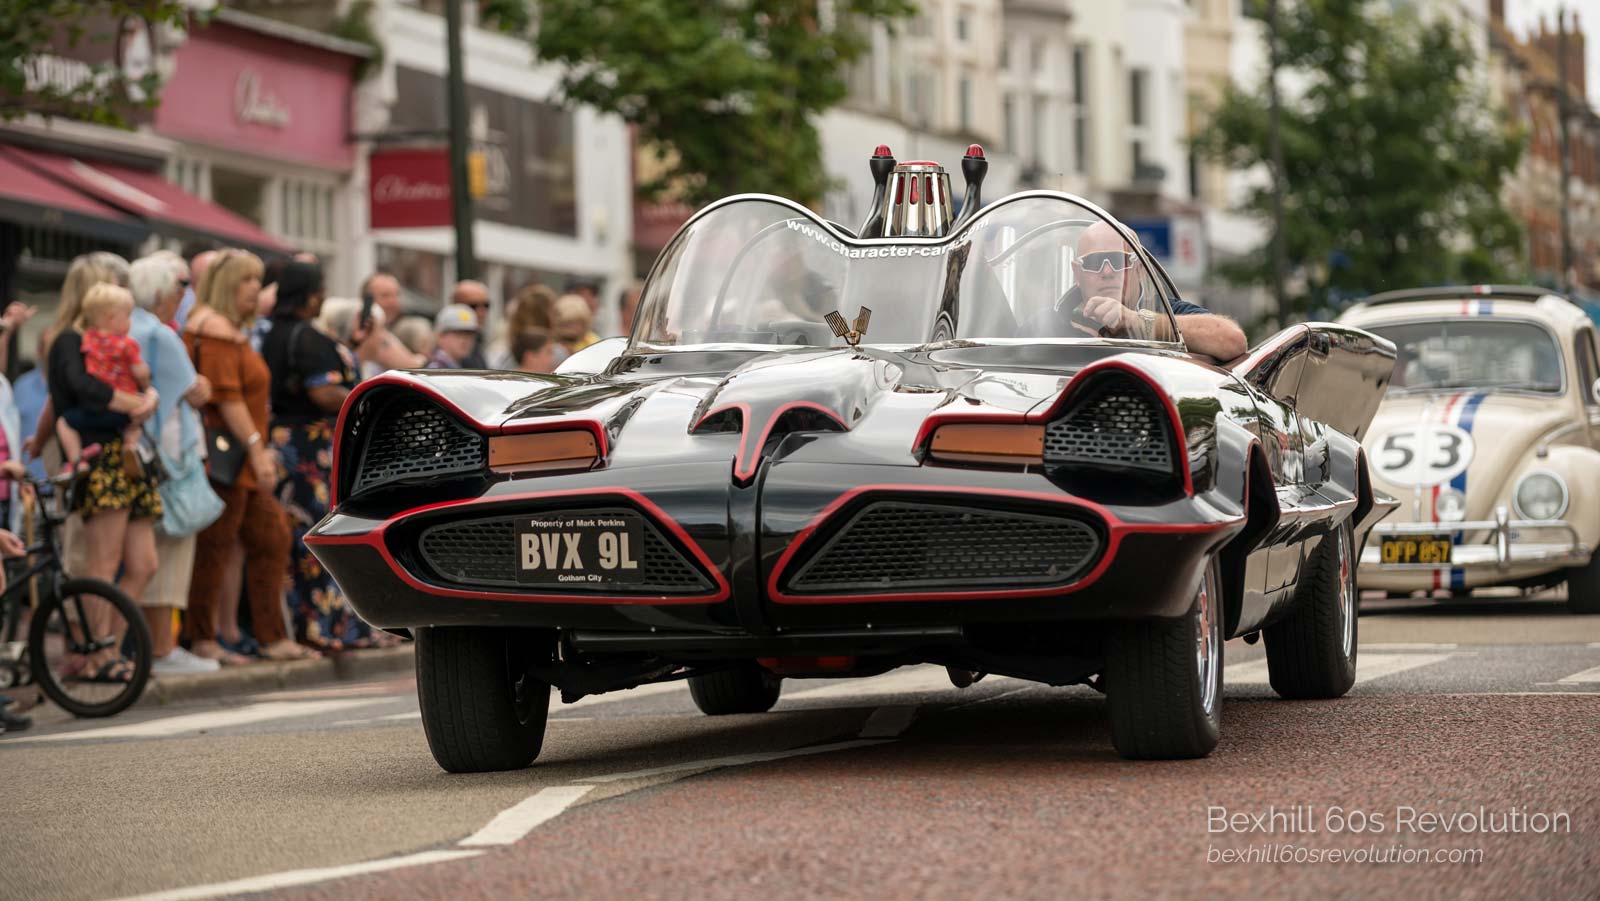 the Batmobile and Herbie at the Bexhill 60s Revolution